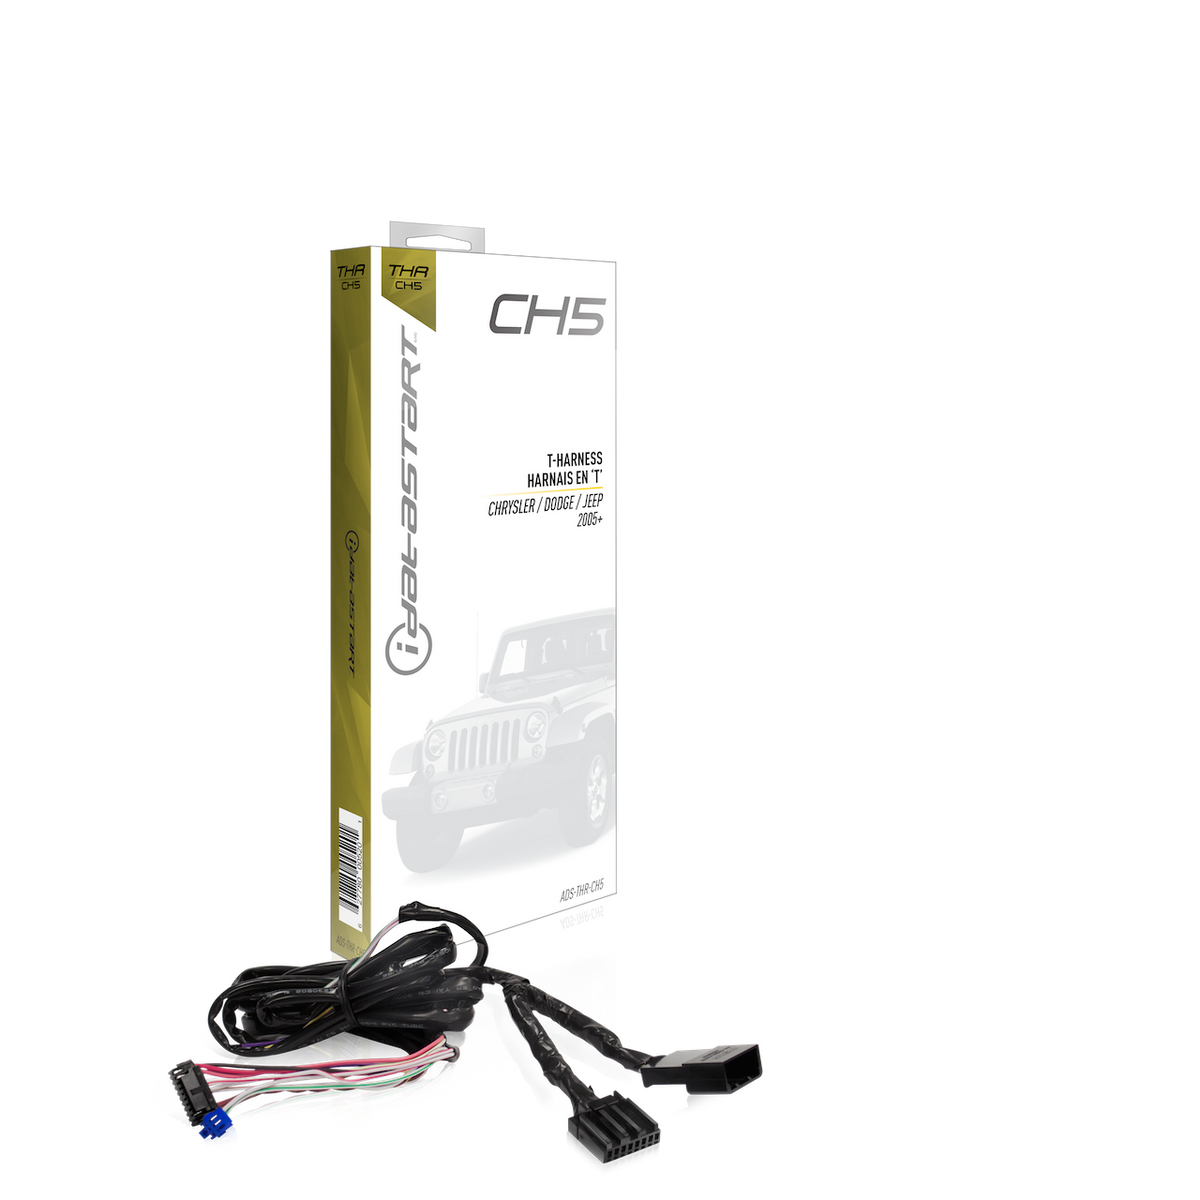 CH5 installation T-harness for iDataStart HC and other compatible products